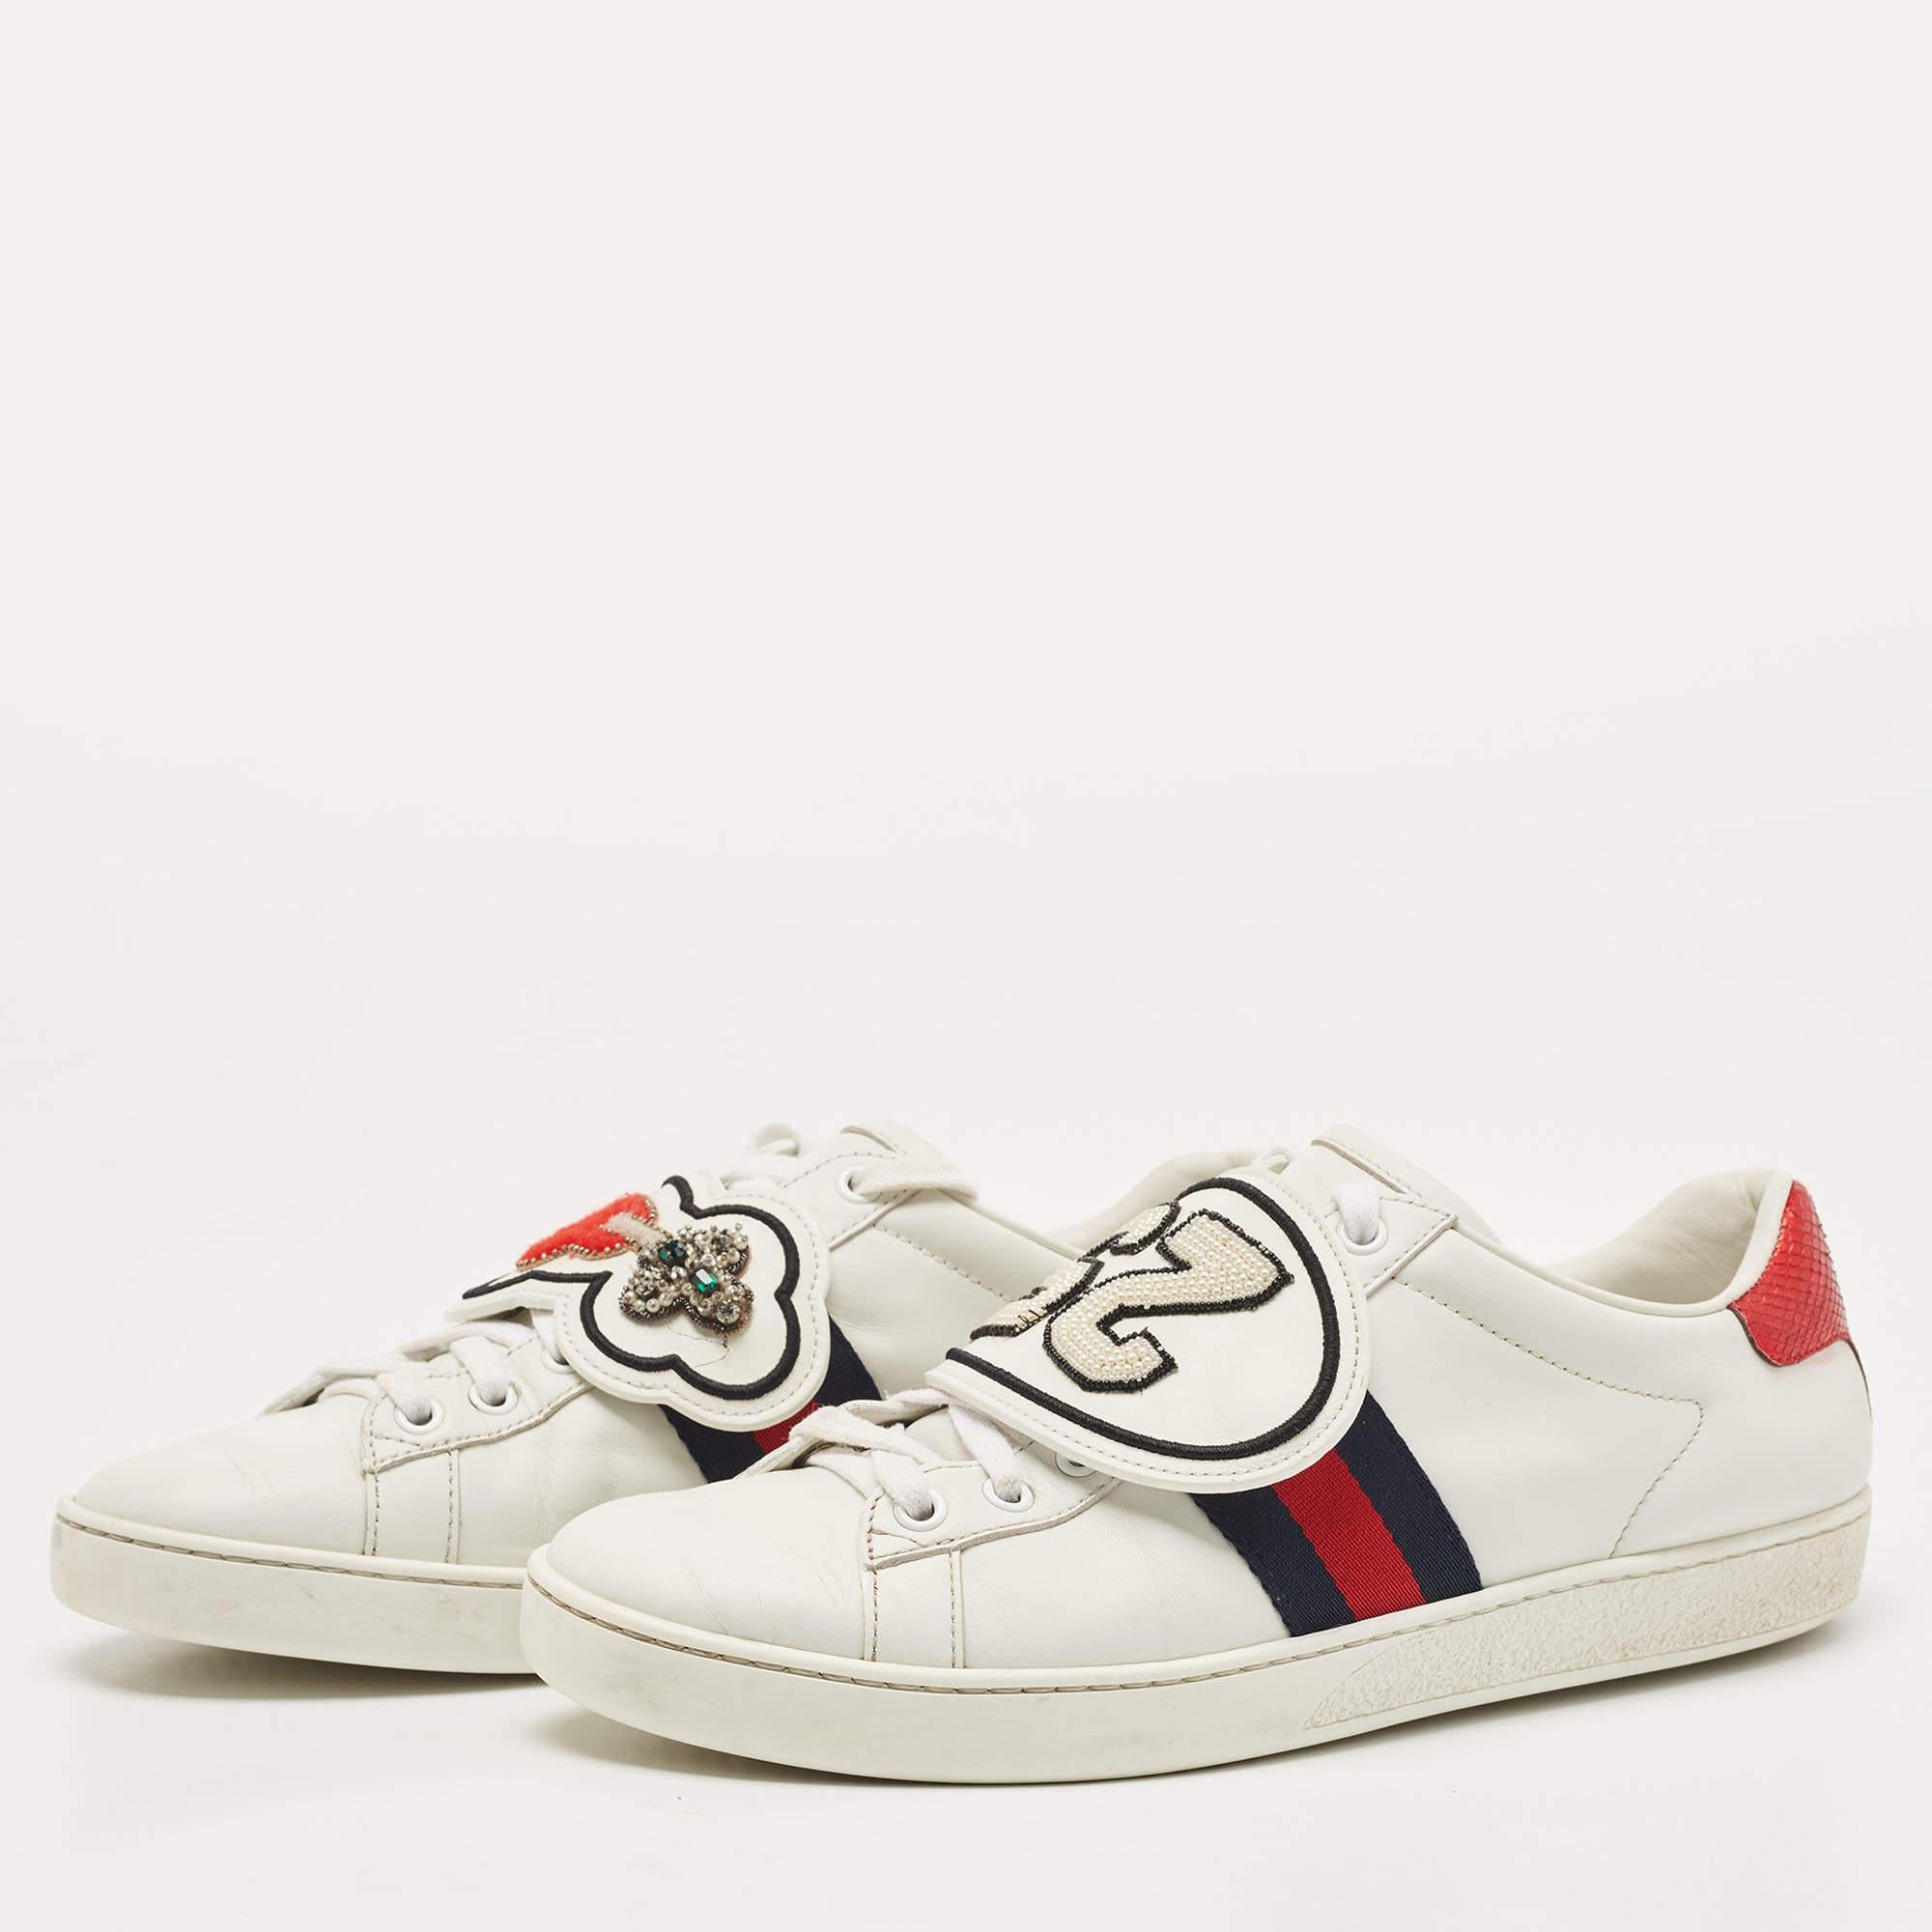 Packed with style and comfort, these Gucci sneakers are gentle on the feet so that you can glide through the day. They have a sleek upper with lace closure, and they're set on durable rubber soles.

